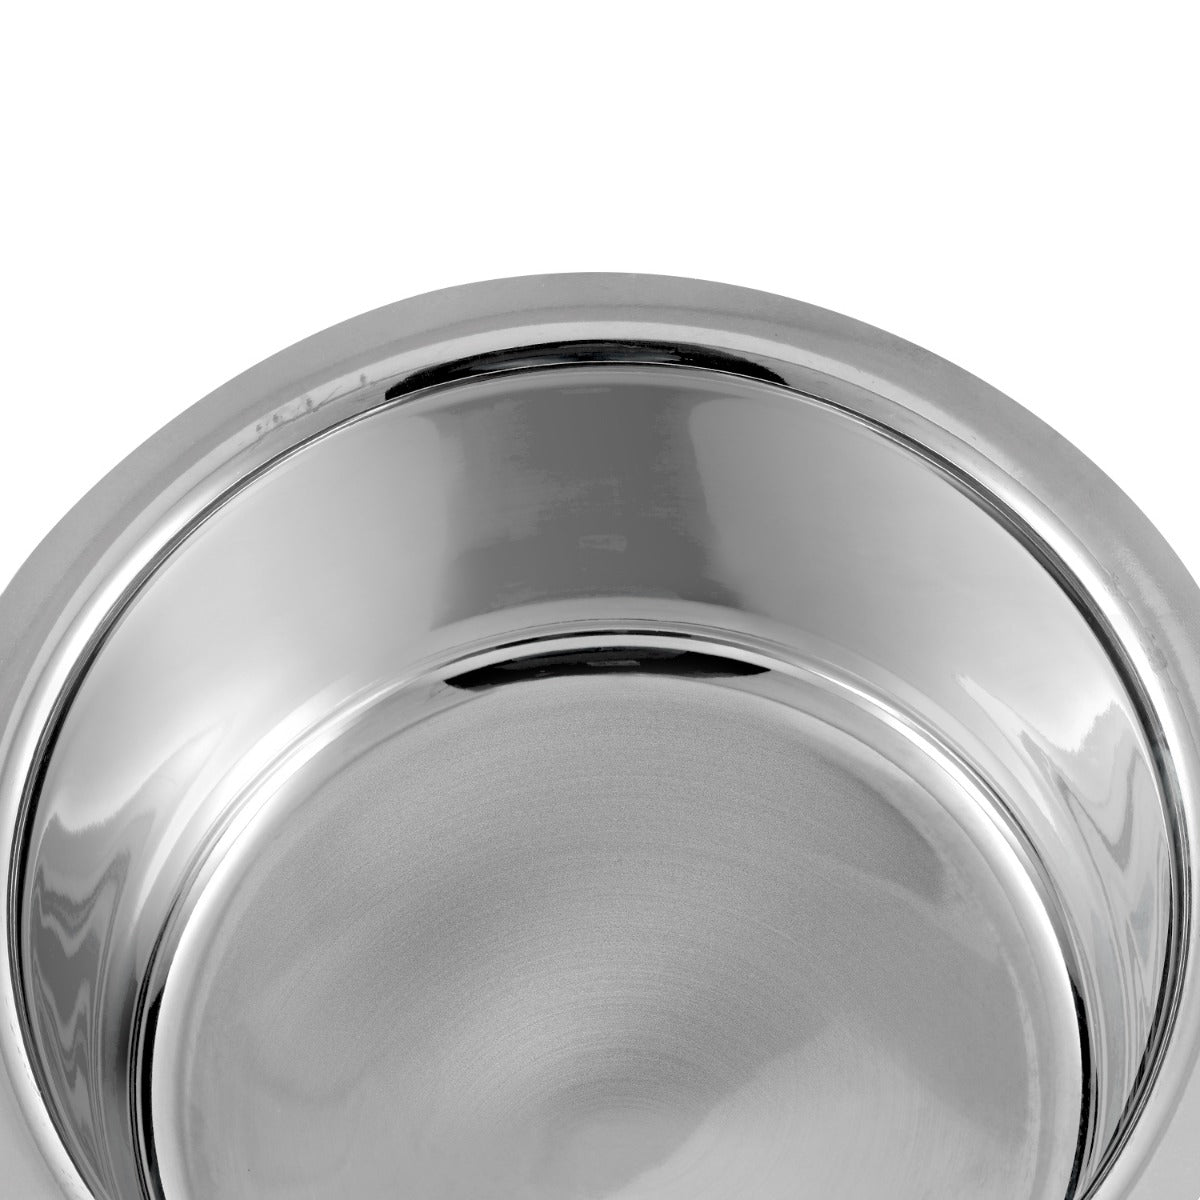 Vinod Stainless Steel 2 Piece Capsule Bottom Tope without lid -17, 18 cm